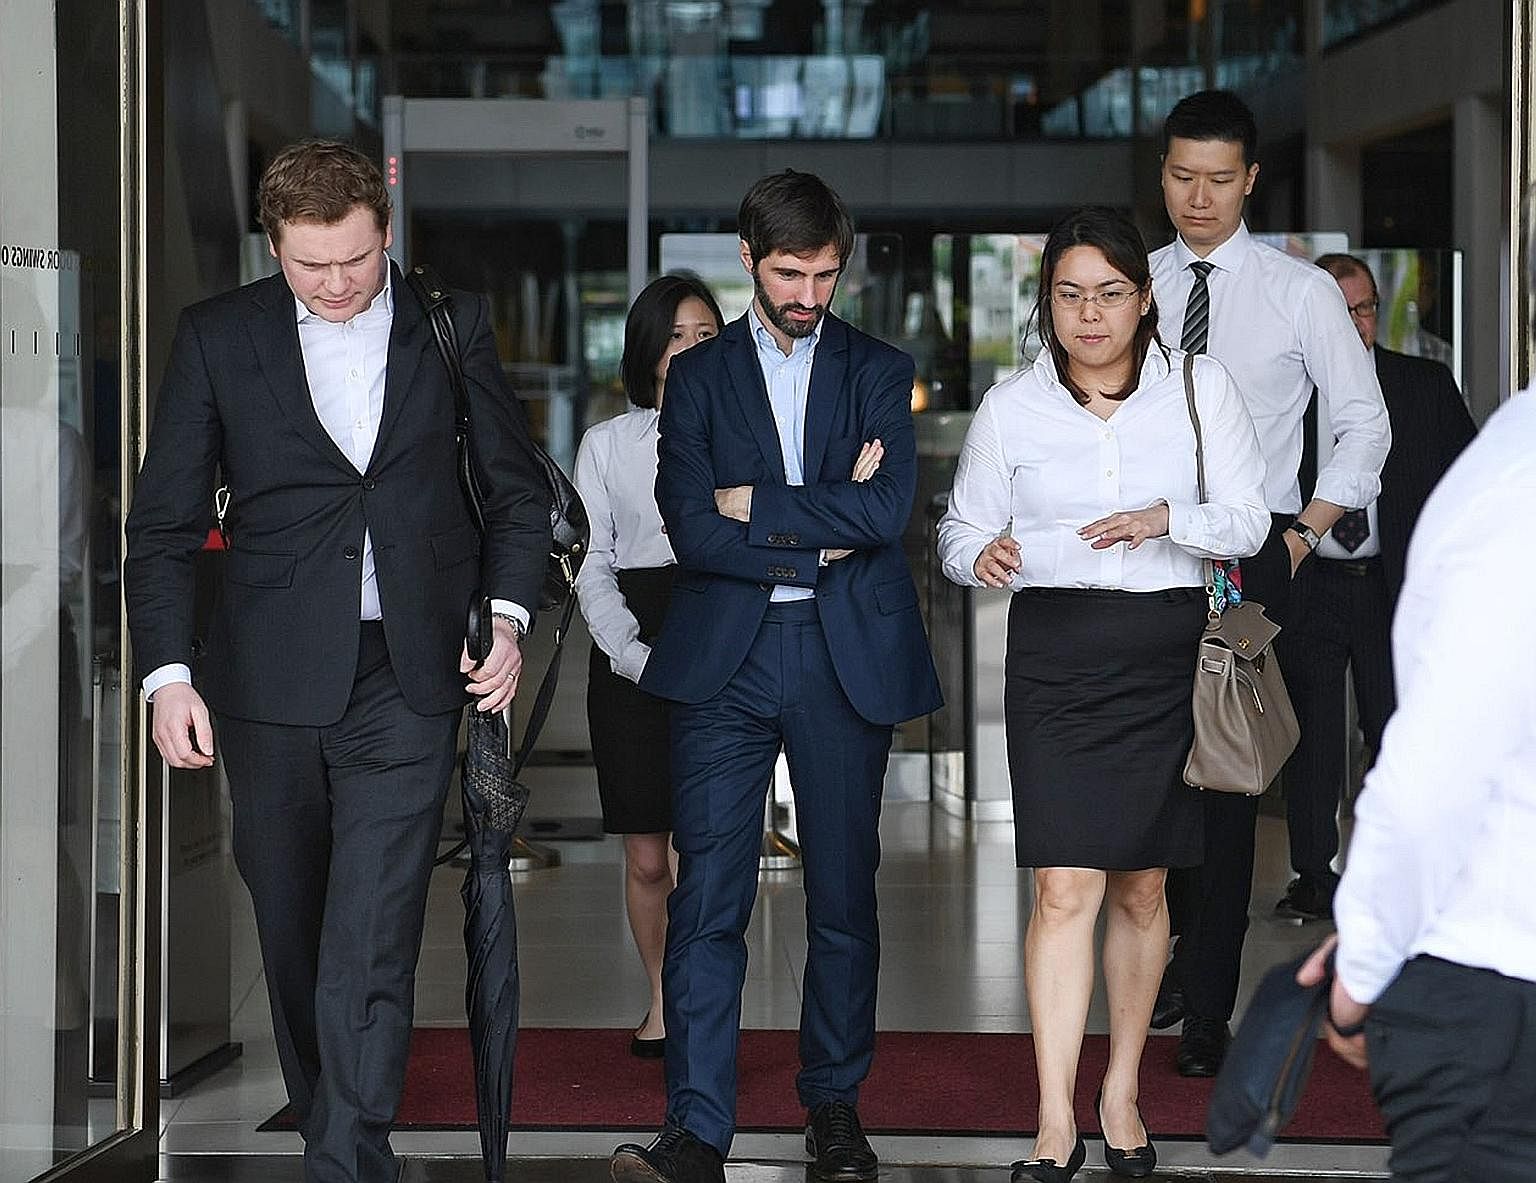 B2C2 co-founder Maxime Boonen (centre), with his lawyers at the court yesterday. The electronic market maker is suing cryptocurrency exchange operator Quoine over a "unilateral reversal" of orders on its platform.